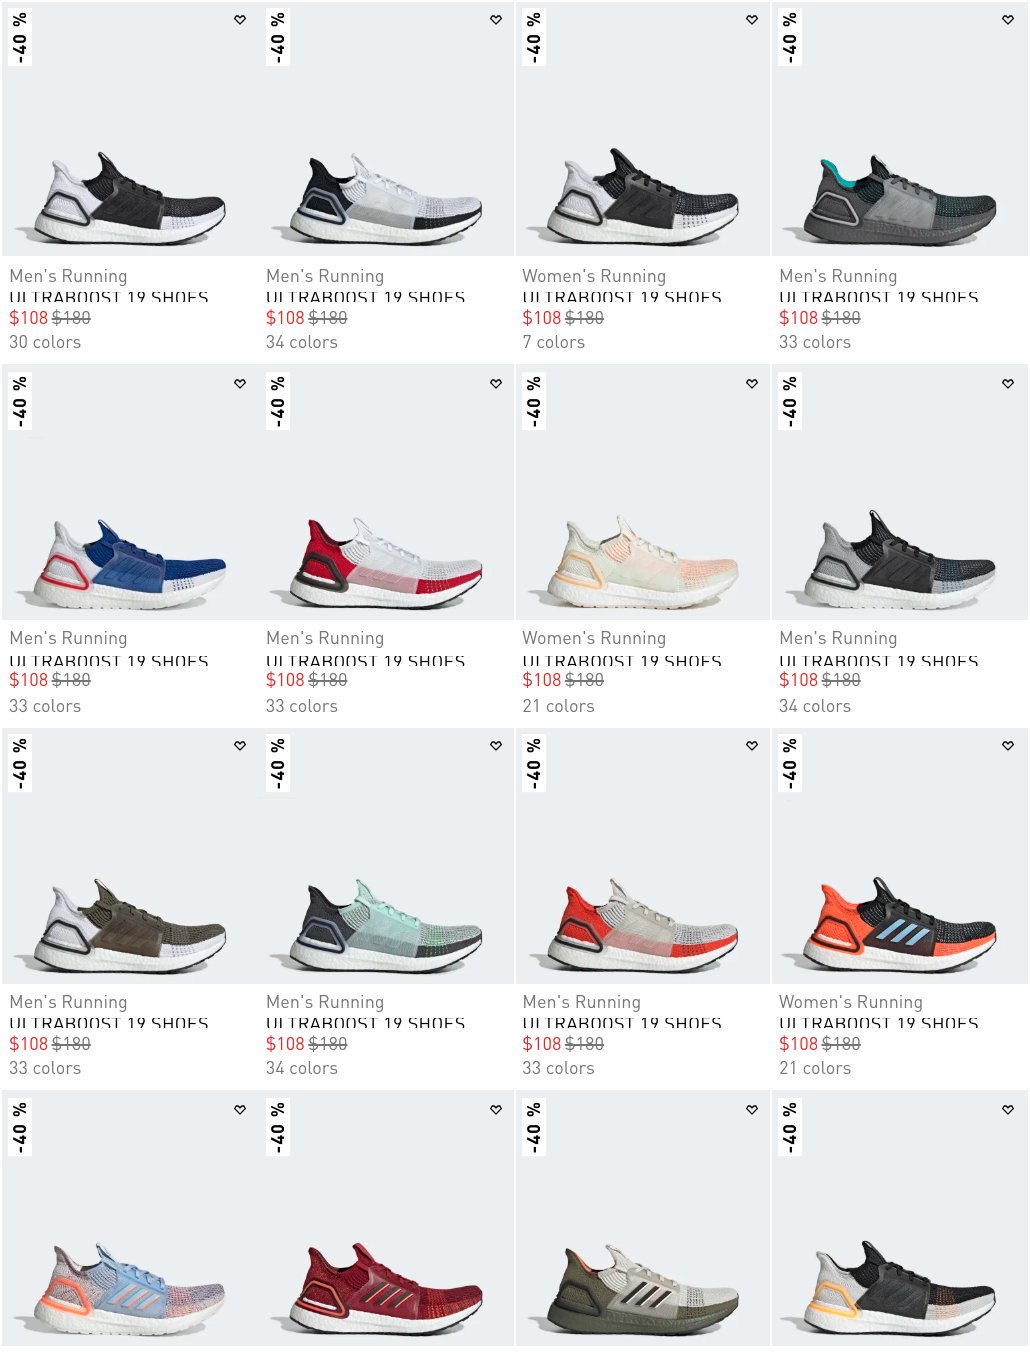 ultra boost 19 all colorways